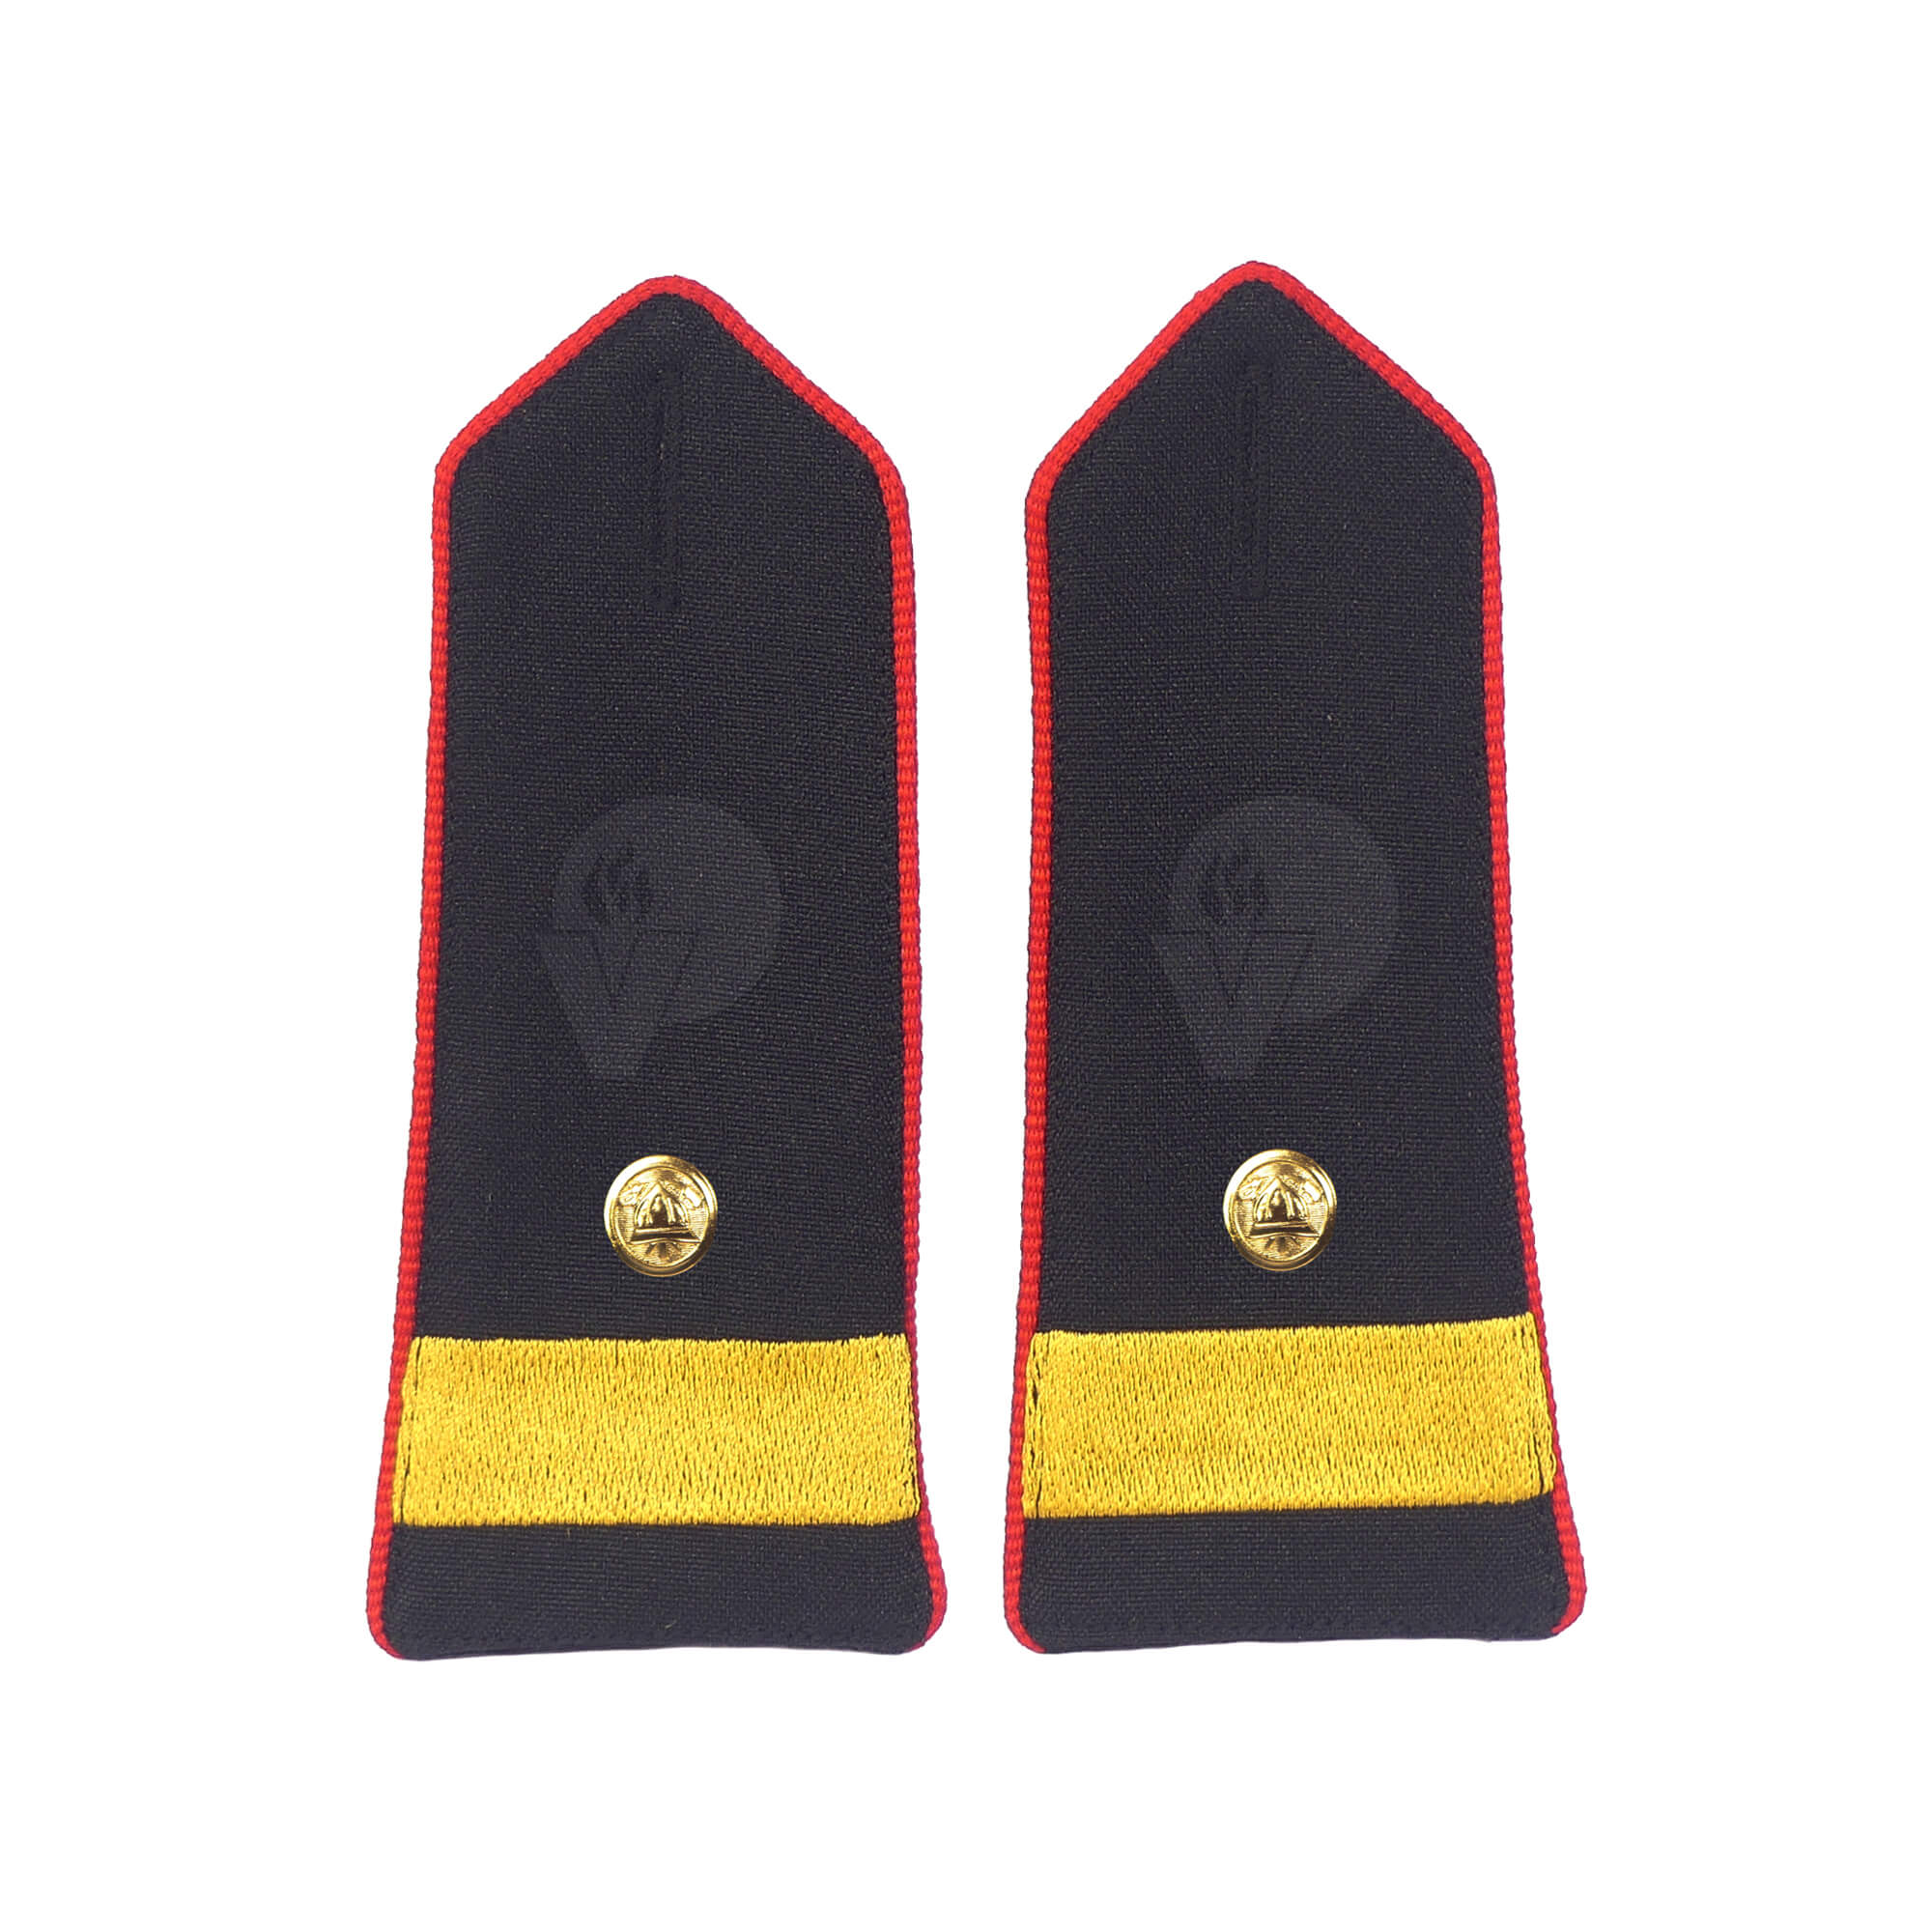 Rank Marks for Professional Firefighters, Junior Fire Officer